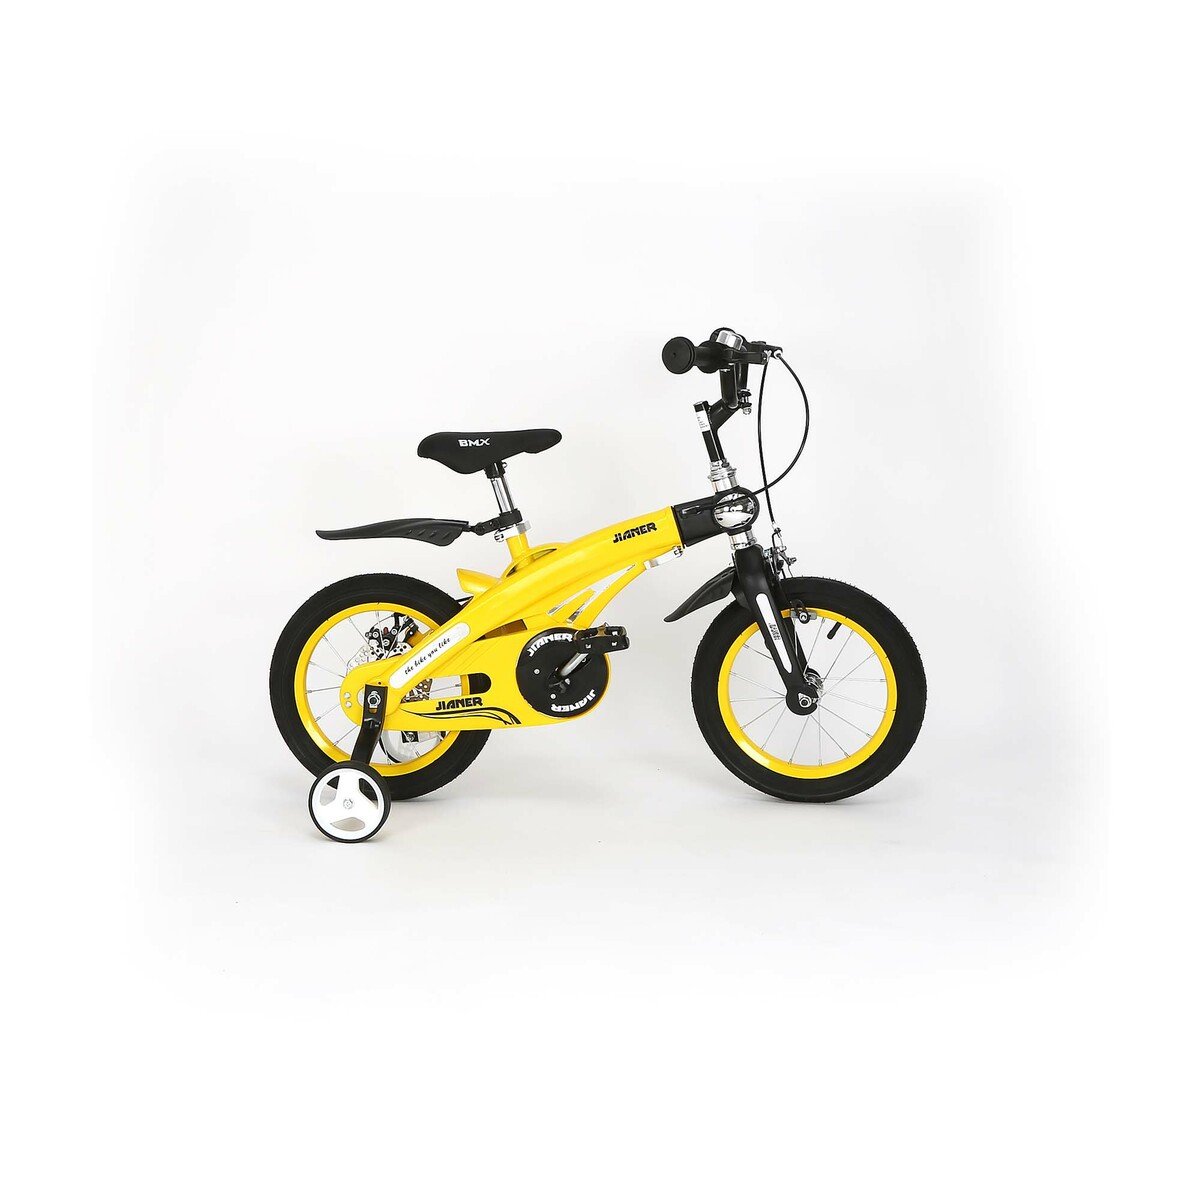 Jianer Kids Bicycle 12"  WLNSF12 Assorted Colors